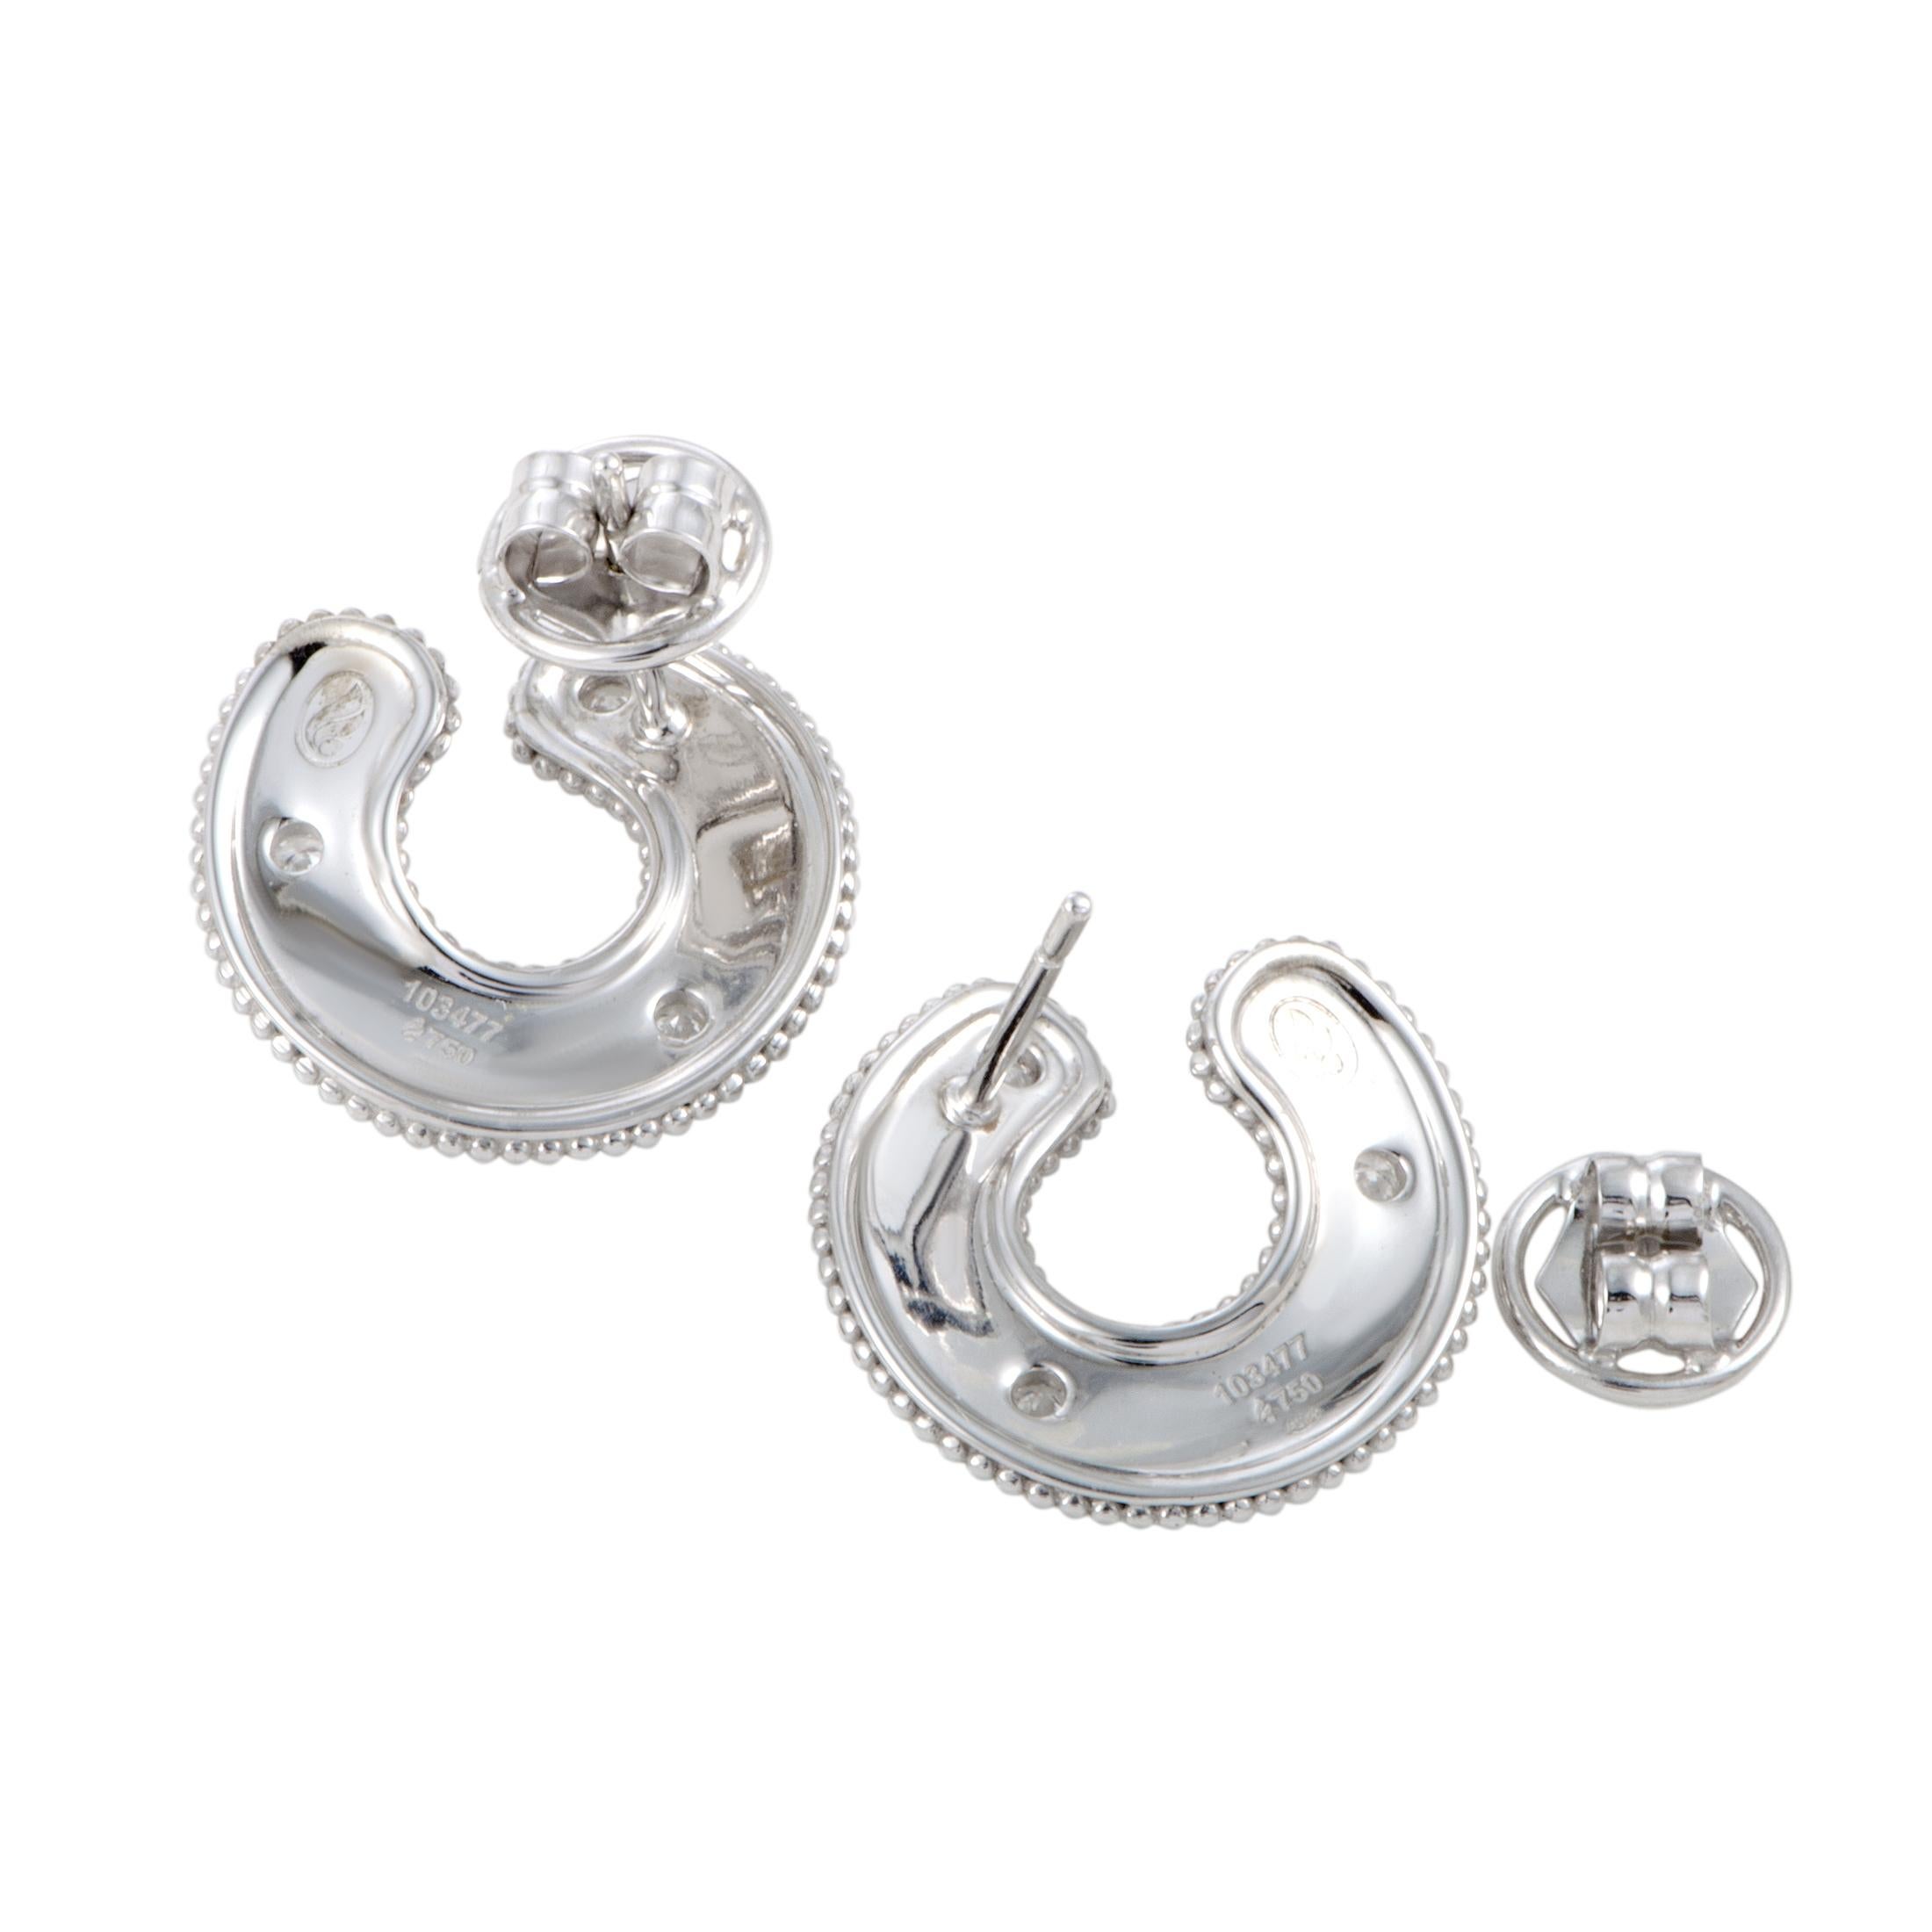 Presented within the exceptional “Babylon” collection, this extraordinary pair of earrings boasts a captivating design that is beautifully accentuated by sublime diamond brilliance. The earrings are created by Magerit, and the pair is expertly